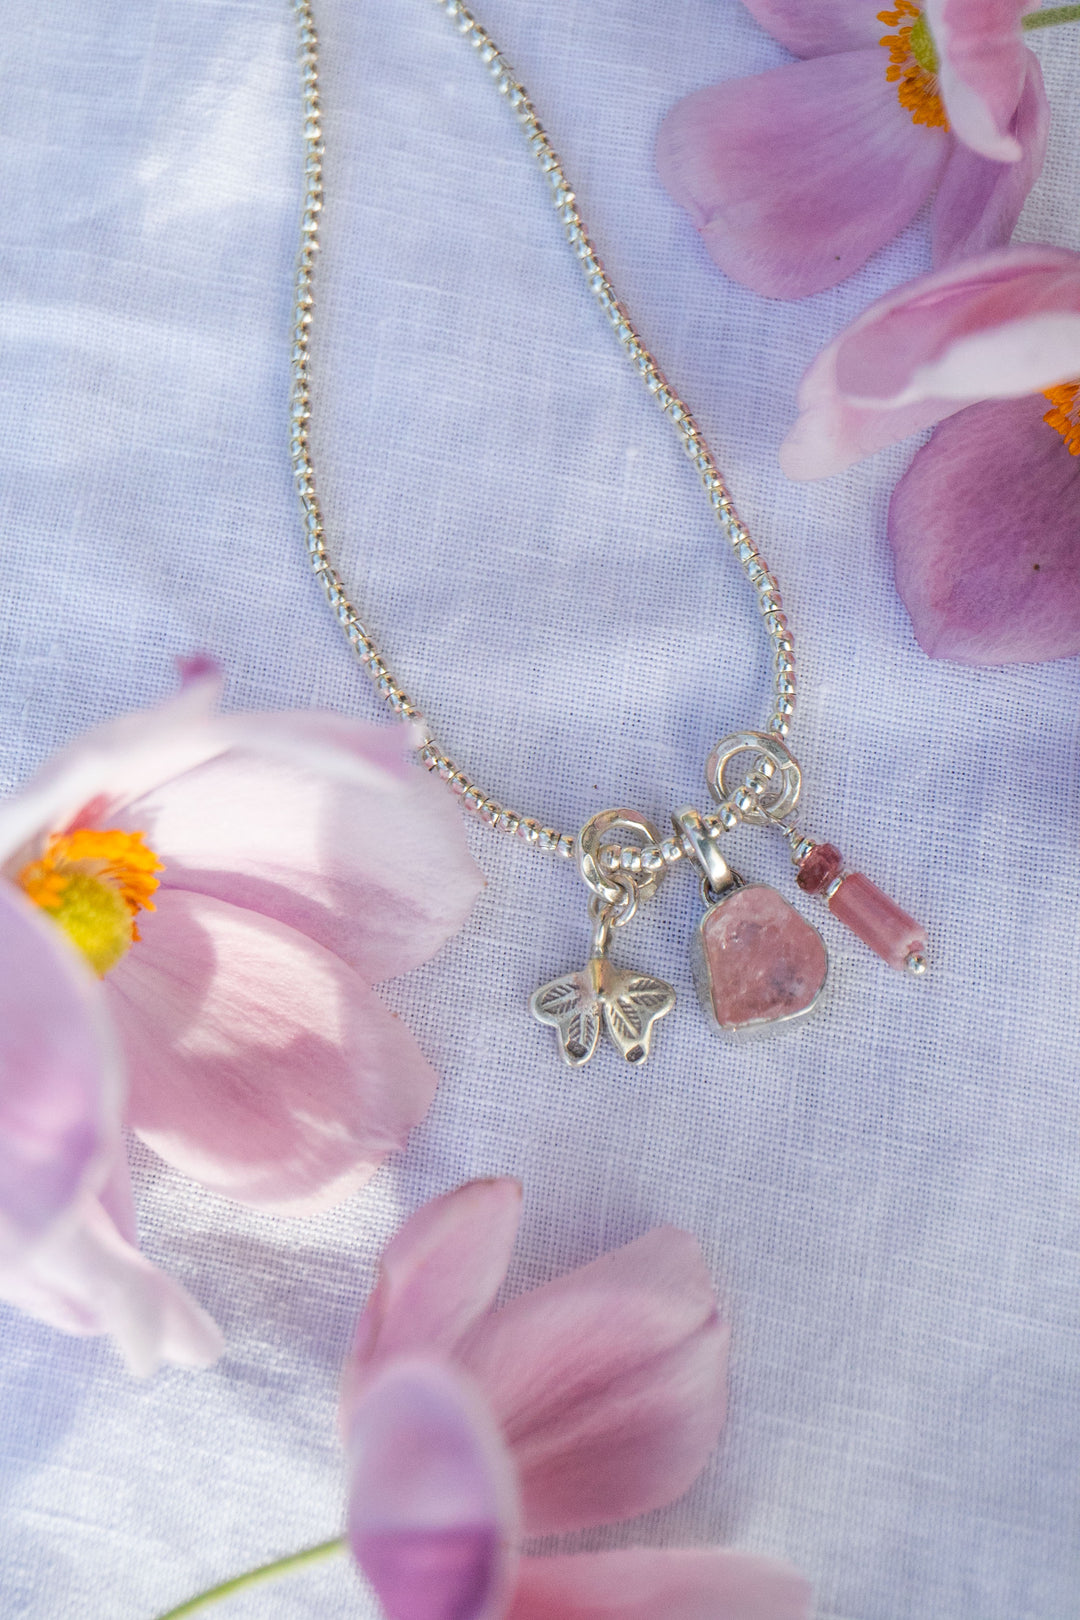 Morganite, Tourmaline and Thai Silver Charm Necklace